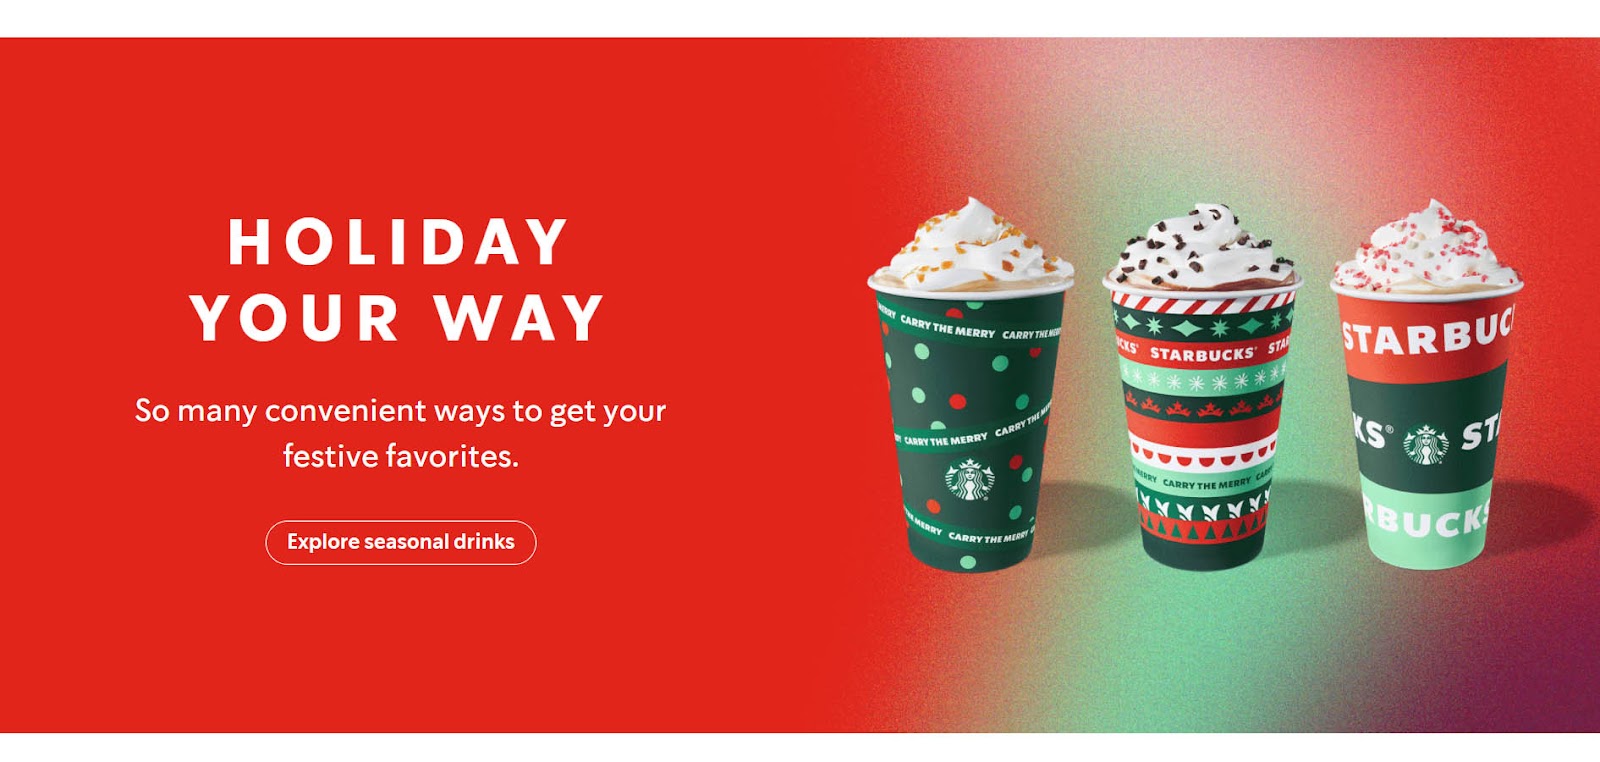 Starbucks' holiday campaign 